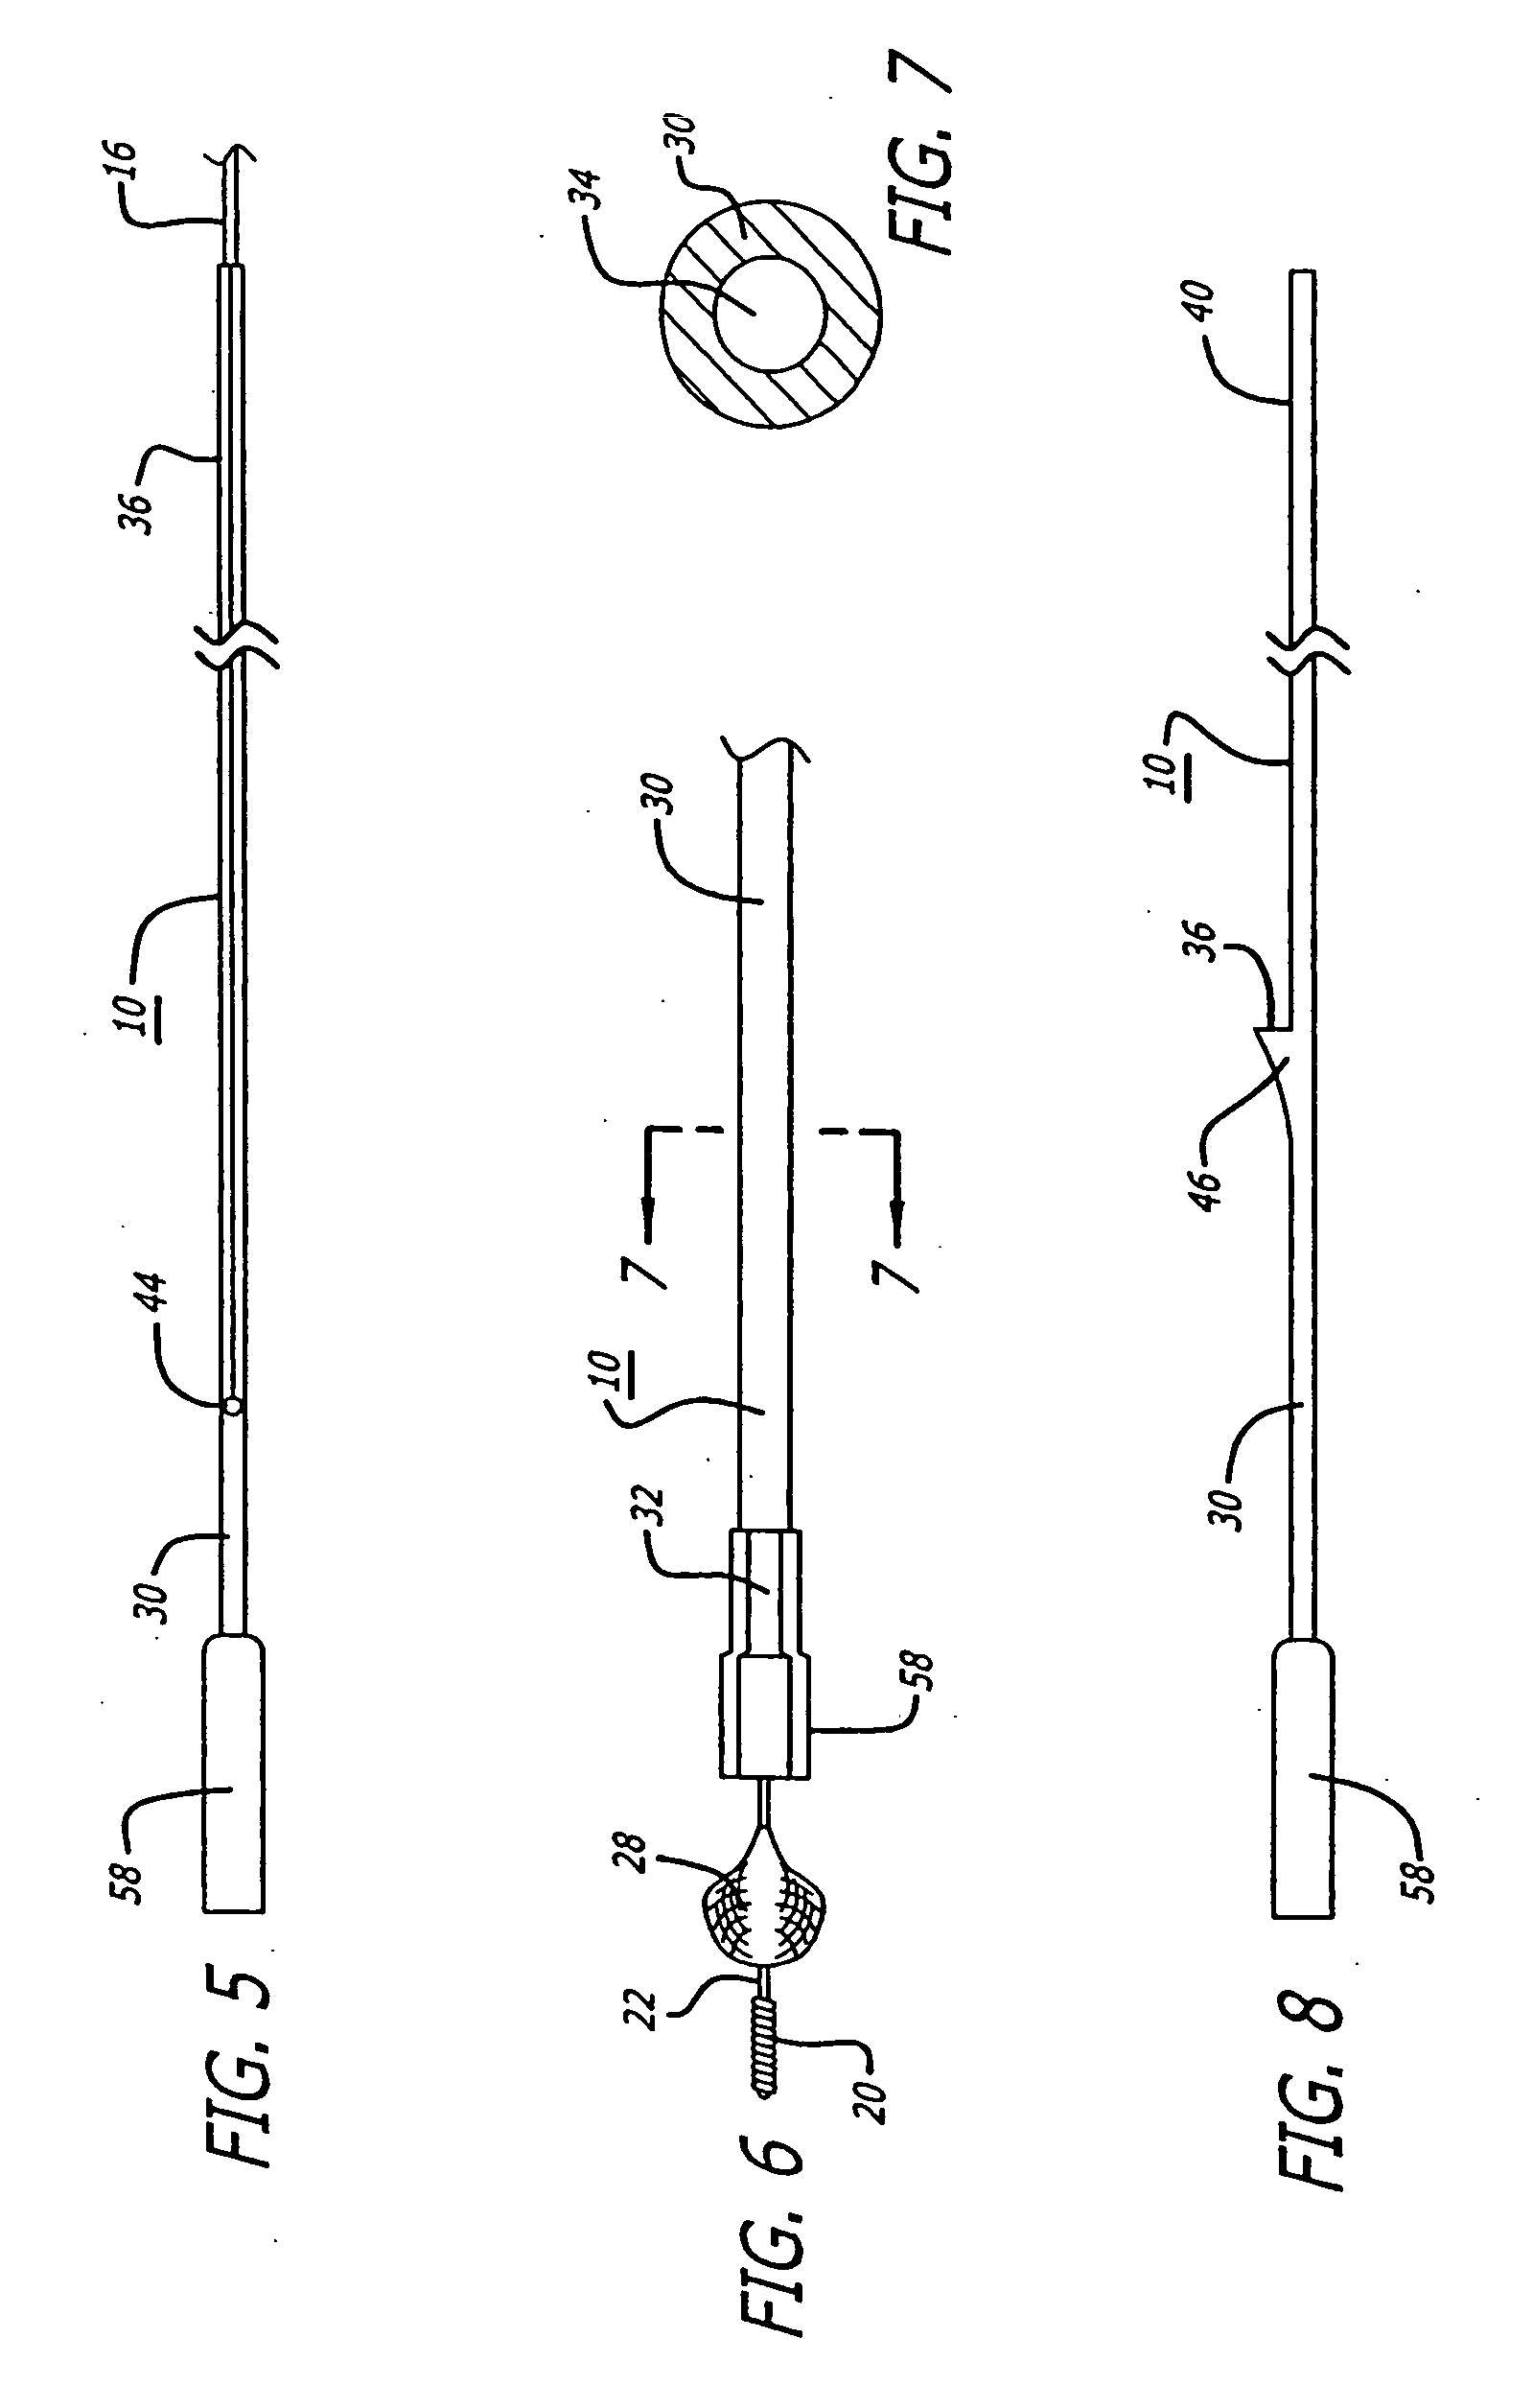 Delivery and recovery system for embolic protection system